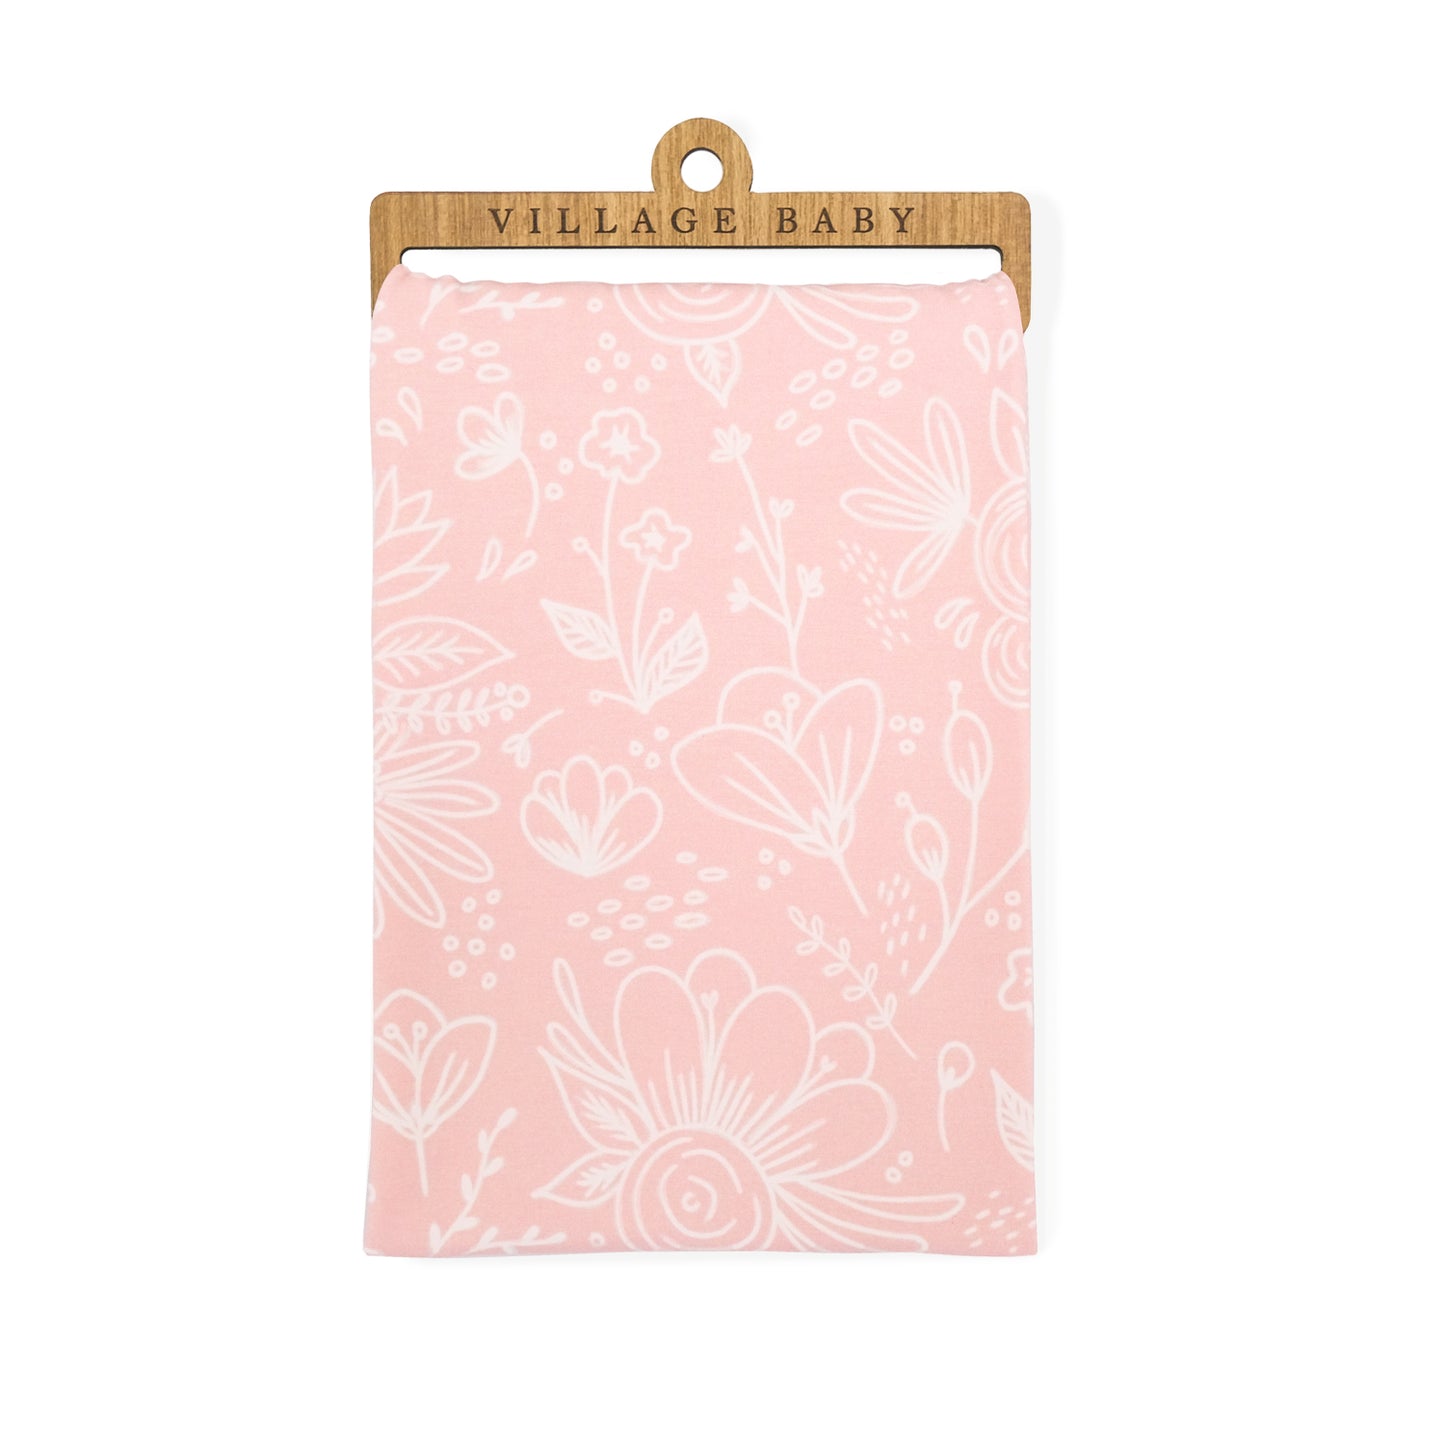 Extra Soft Stretchy Knit Swaddle Blanket: Perfectly Pink